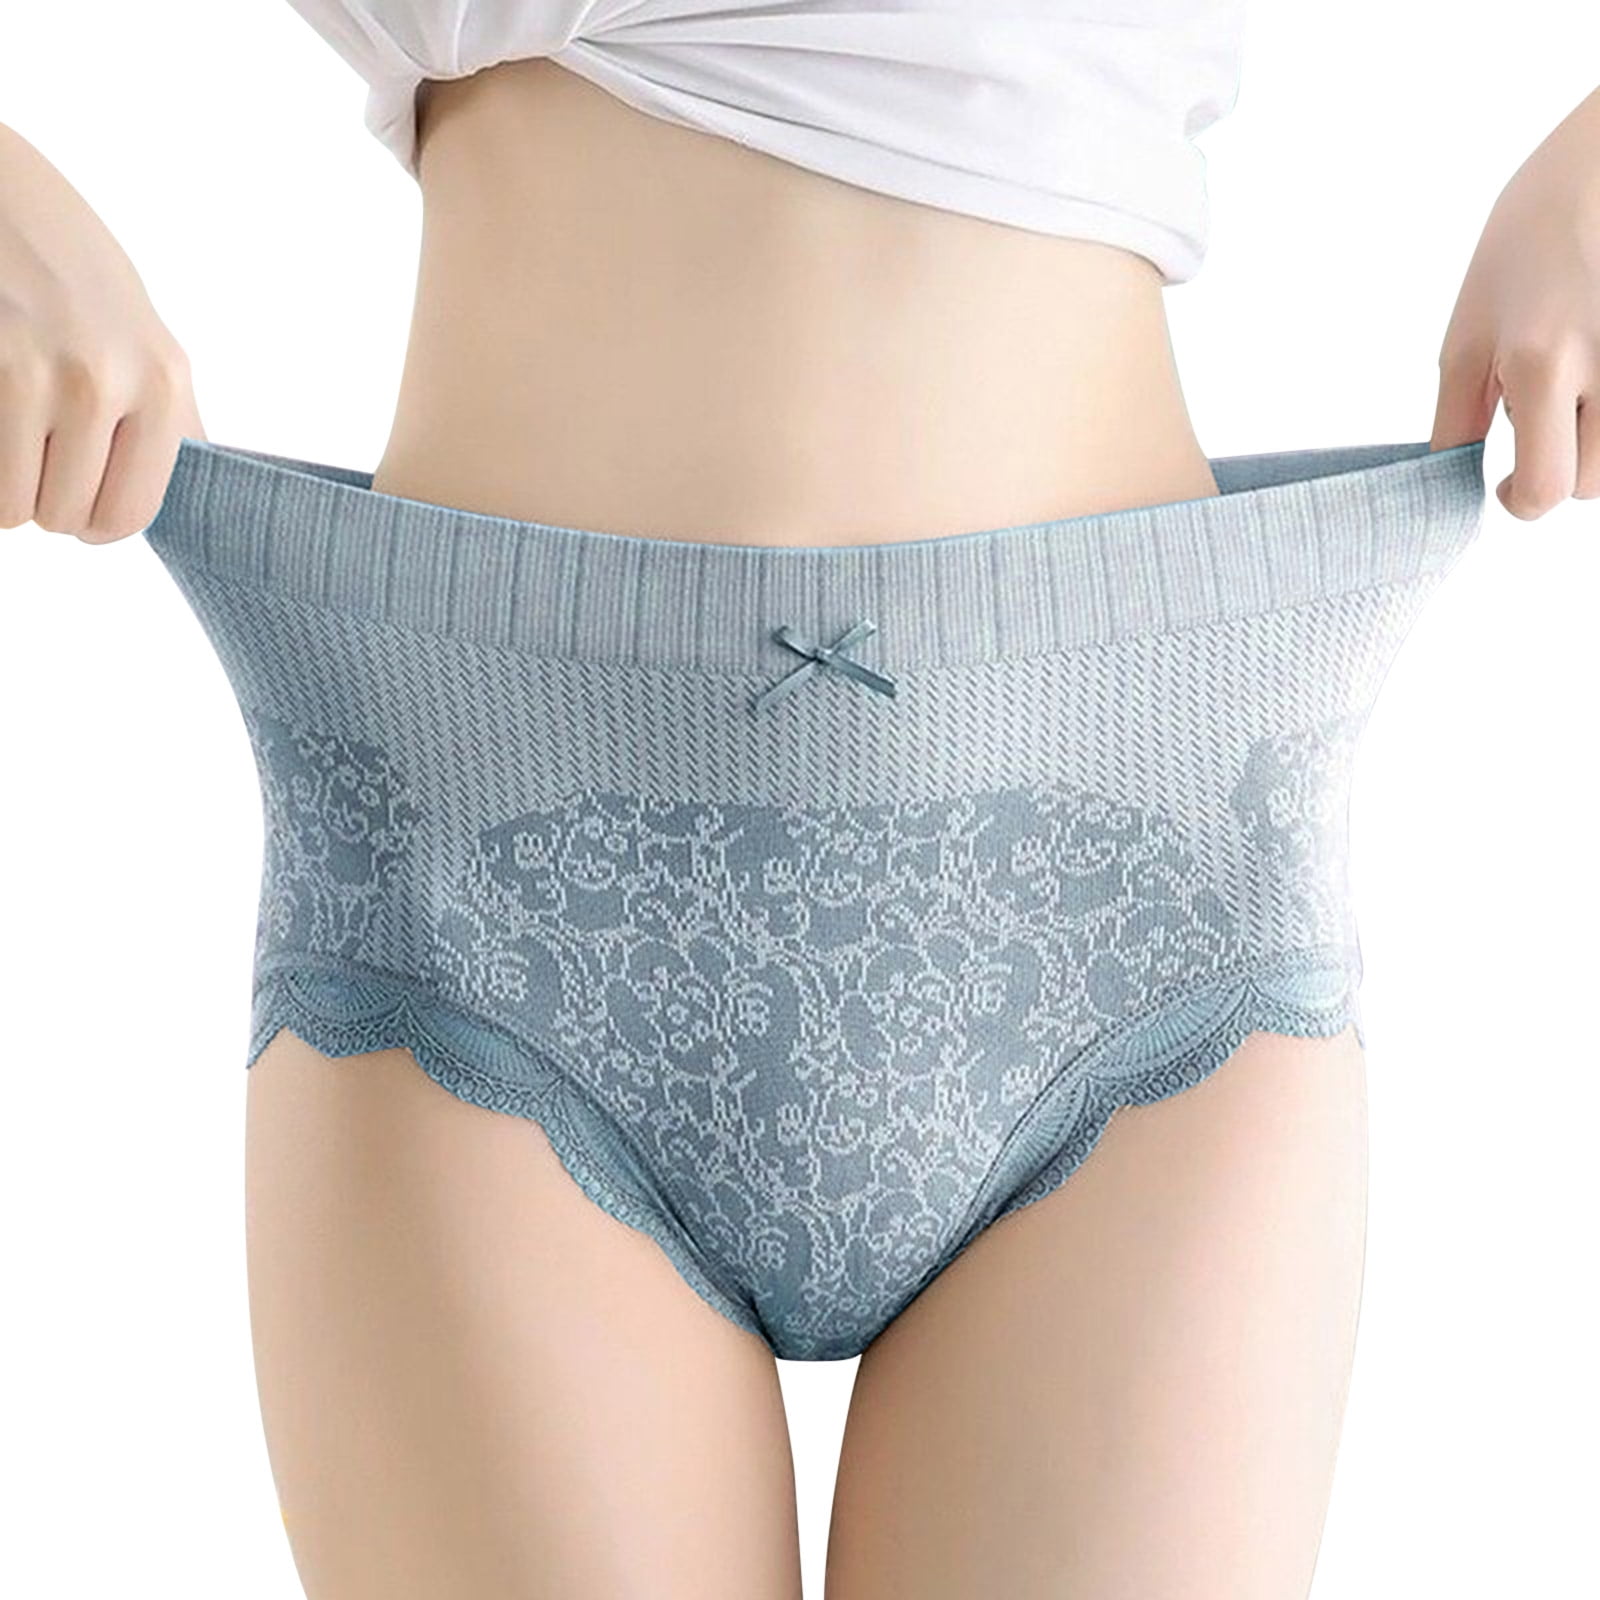 PMUYBHF Cotton Underwear For Women Plus Size 6X Women'S High Waist Lace  Panties With Lifter Comfortable And Stylish Underwear For A Flattering